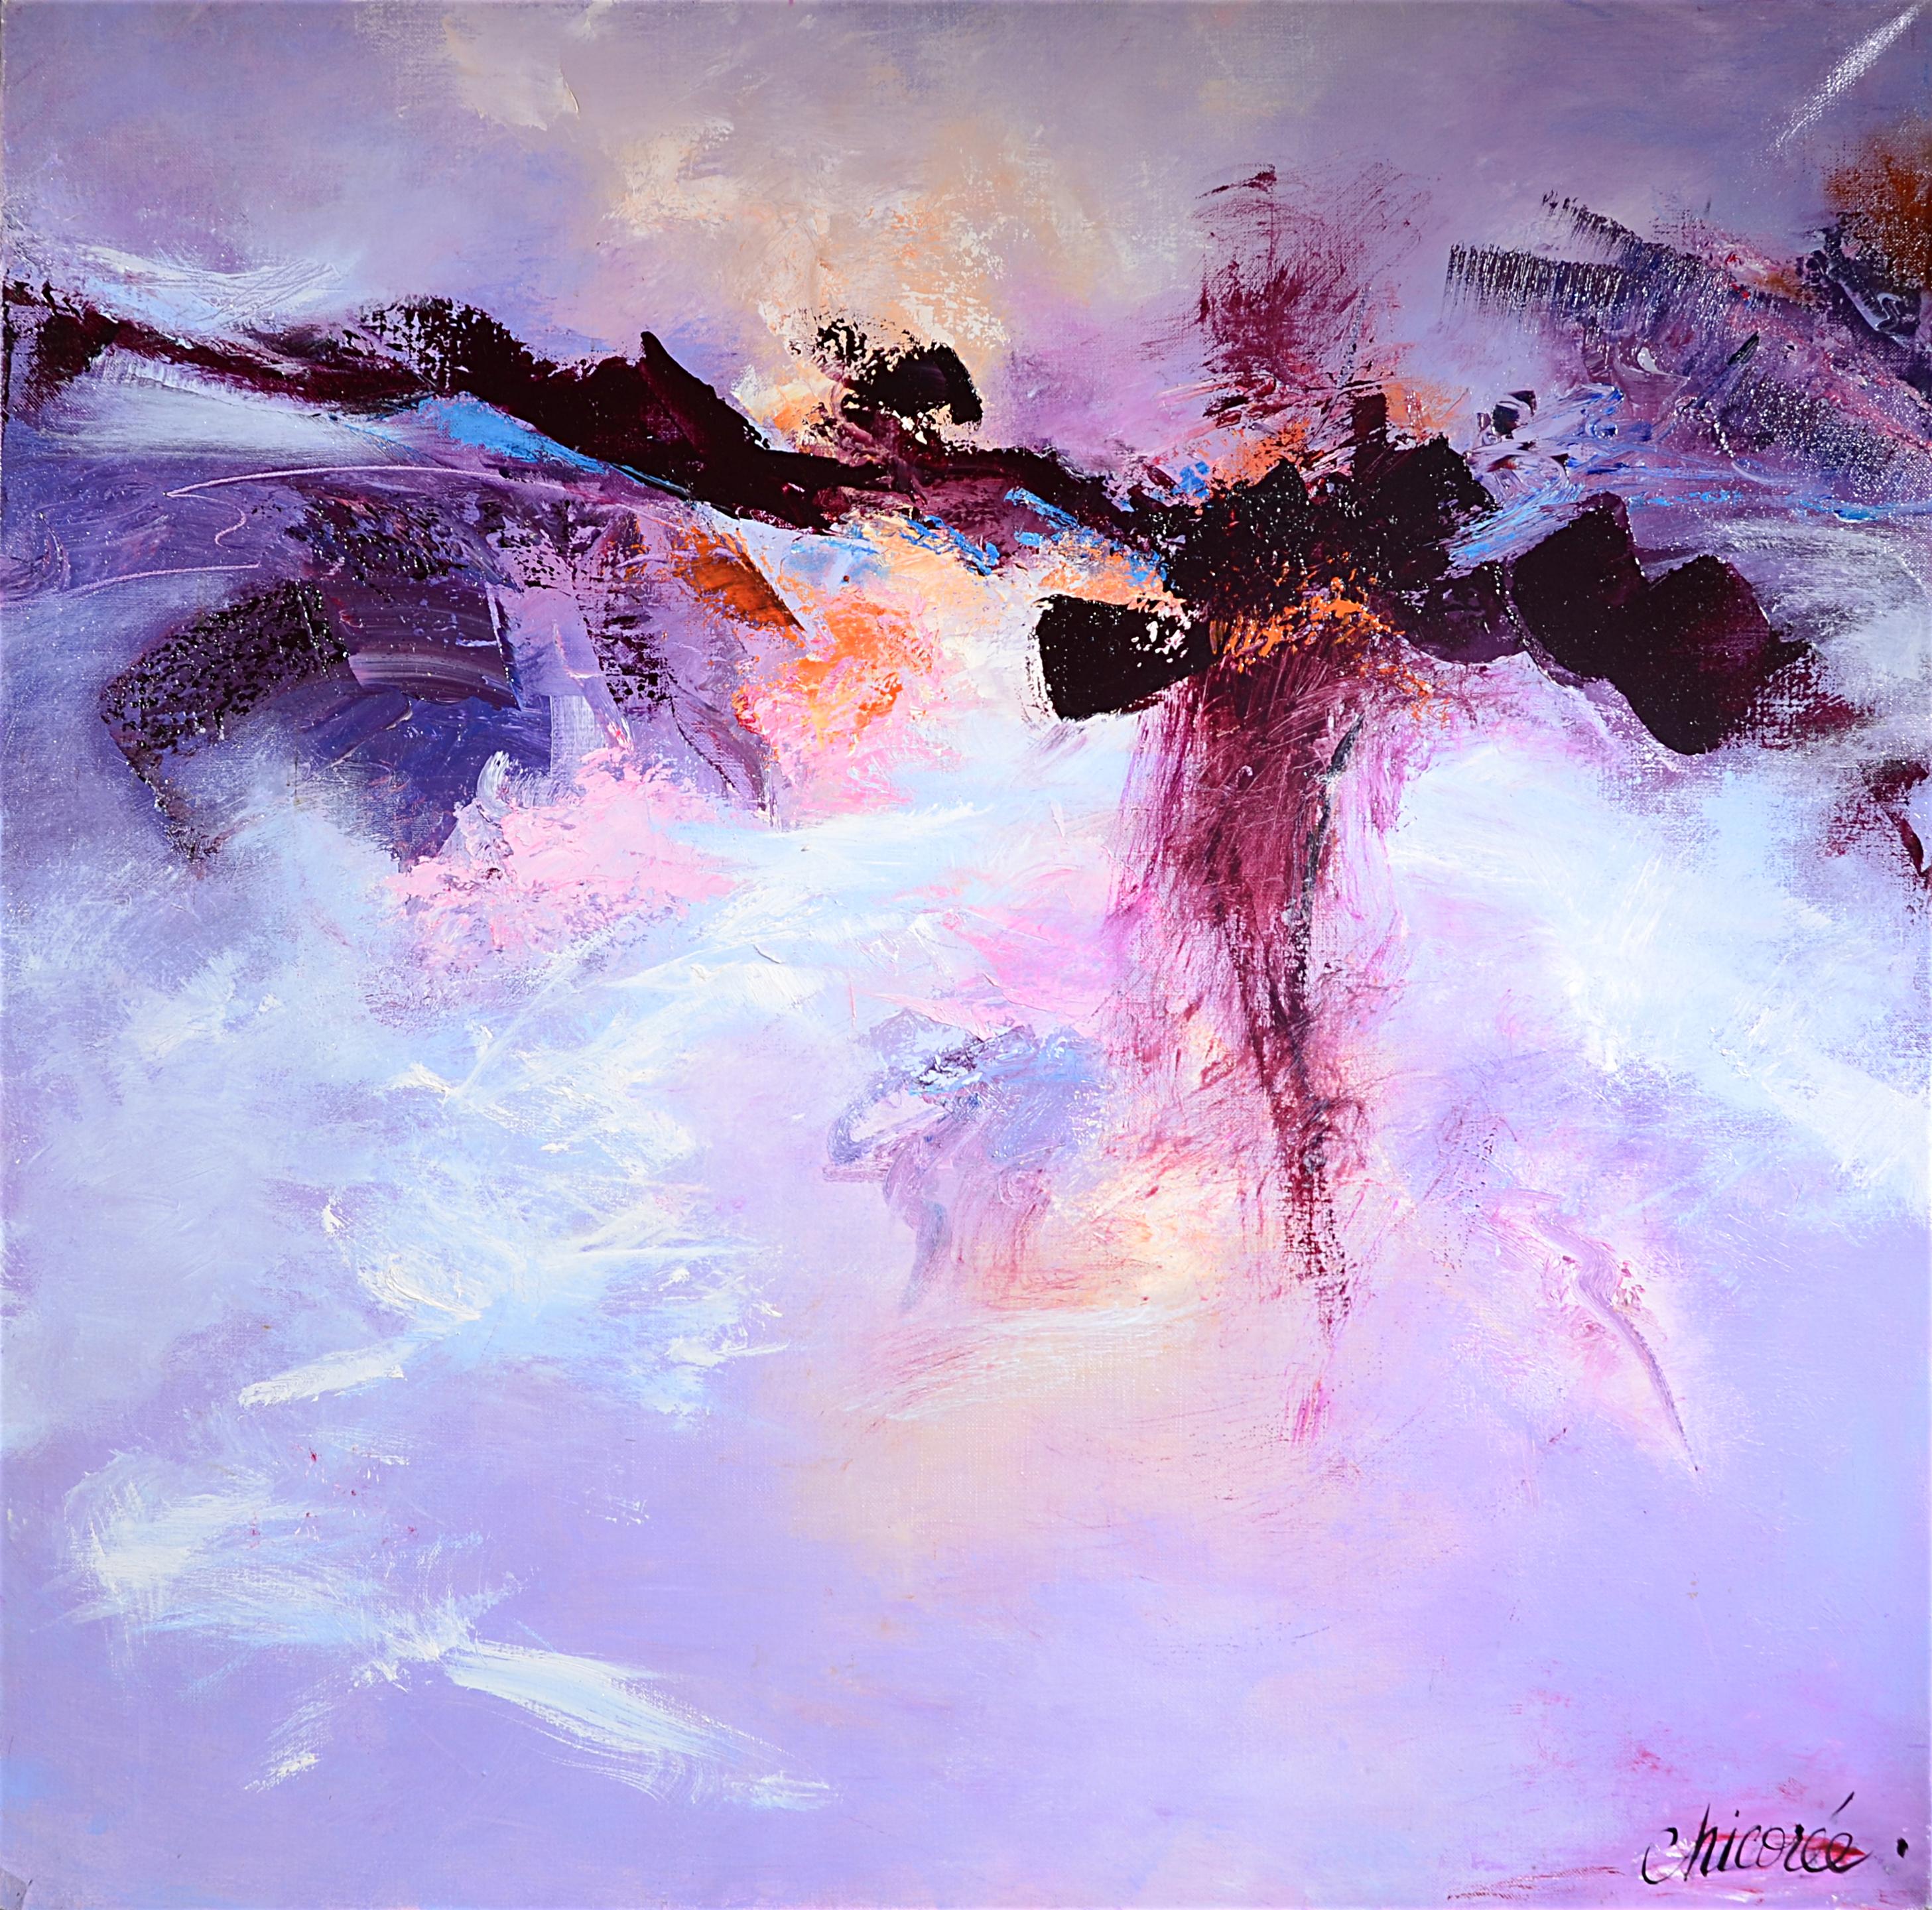 Chicorée Abstract Painting – The Woman ("La femme"), Large Purple Abstract Squared Oil Painting